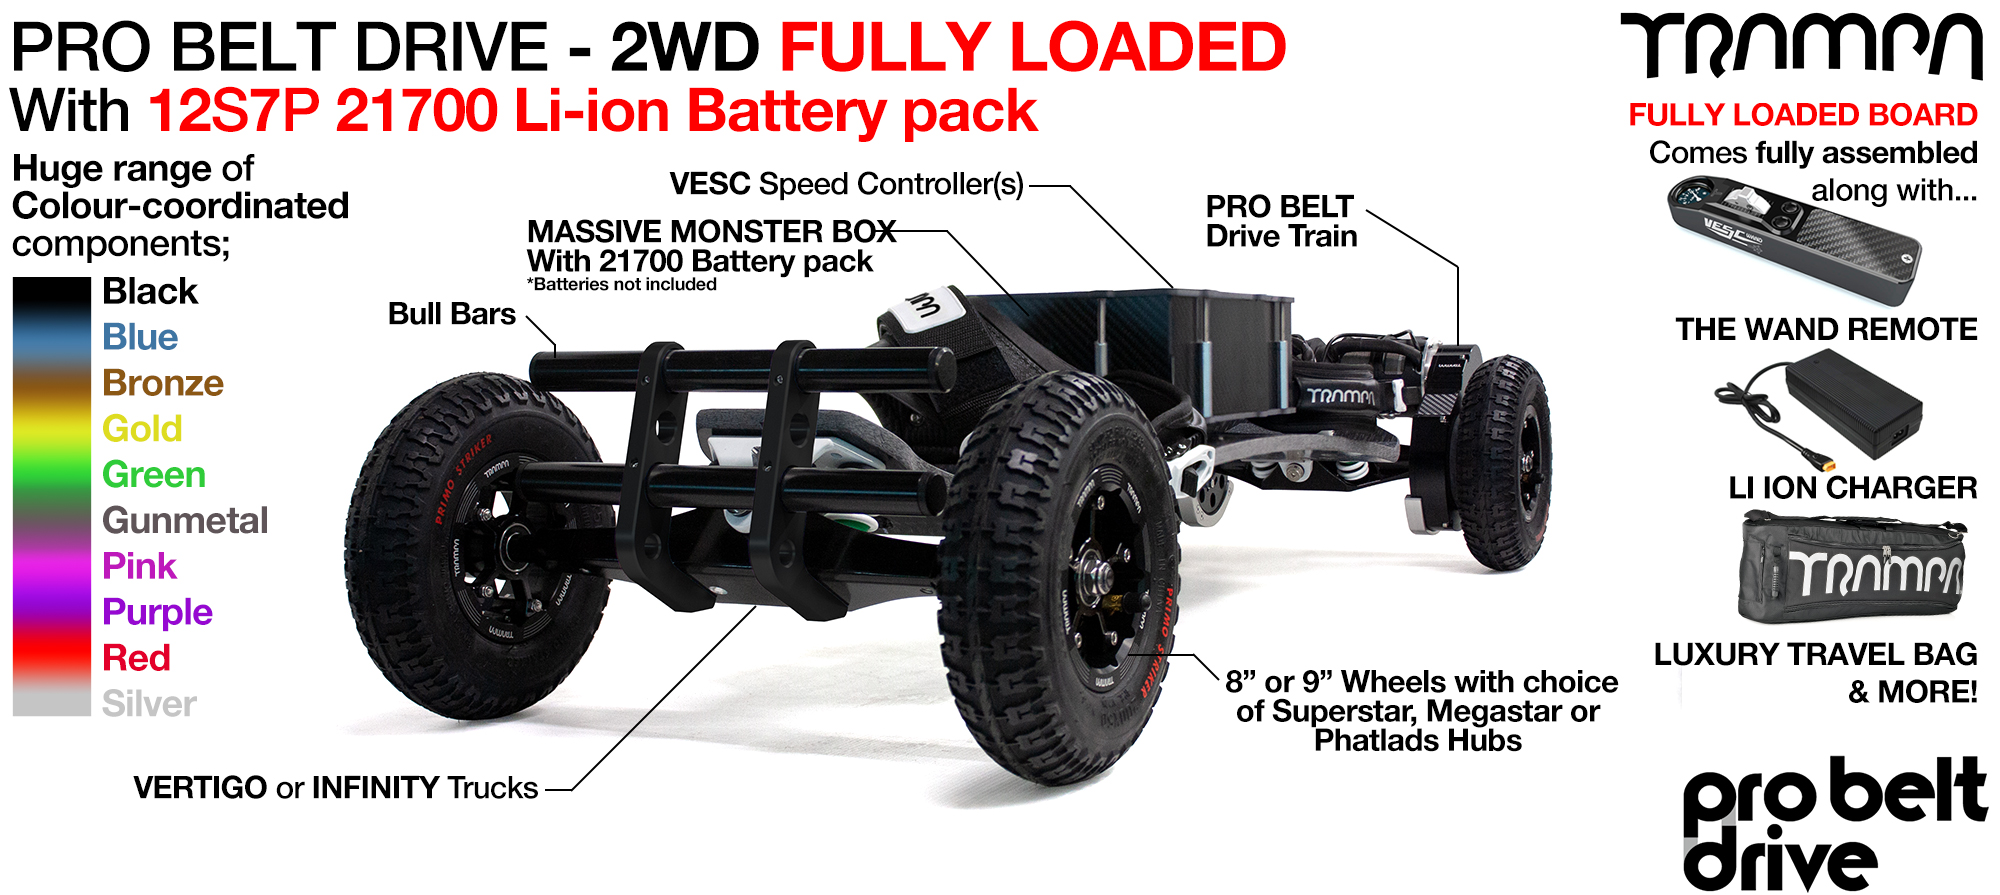 TRAMPA's 2WD 16mm PRO Belt Drive BigBoi FULLY LOADED Electric mountainboard with DOUBLE STACK MASSIVE box & 2x 21700 Cell Pack, 12s 12A Charger, The WAND, Bull Bars, MASSIVE RANGE!!